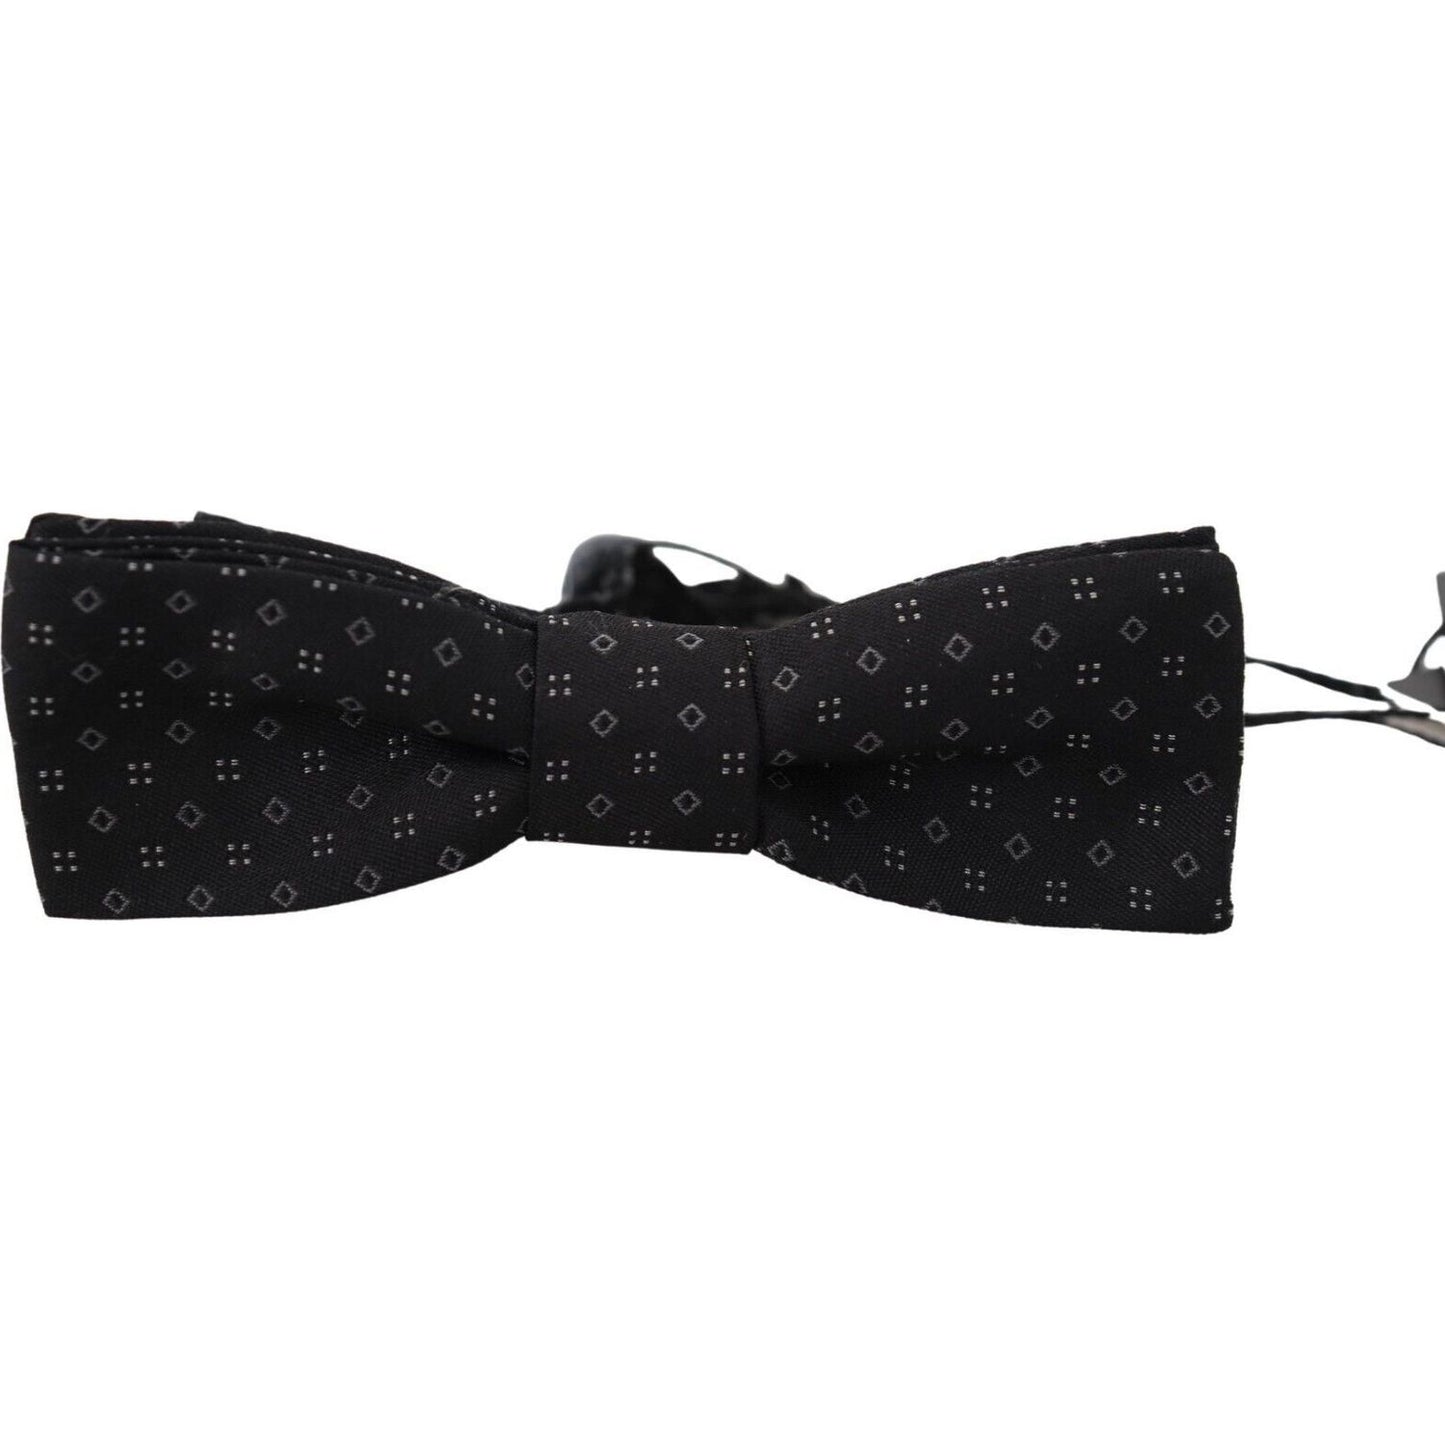 Exclusive Silk Patterned Black Bow Tie